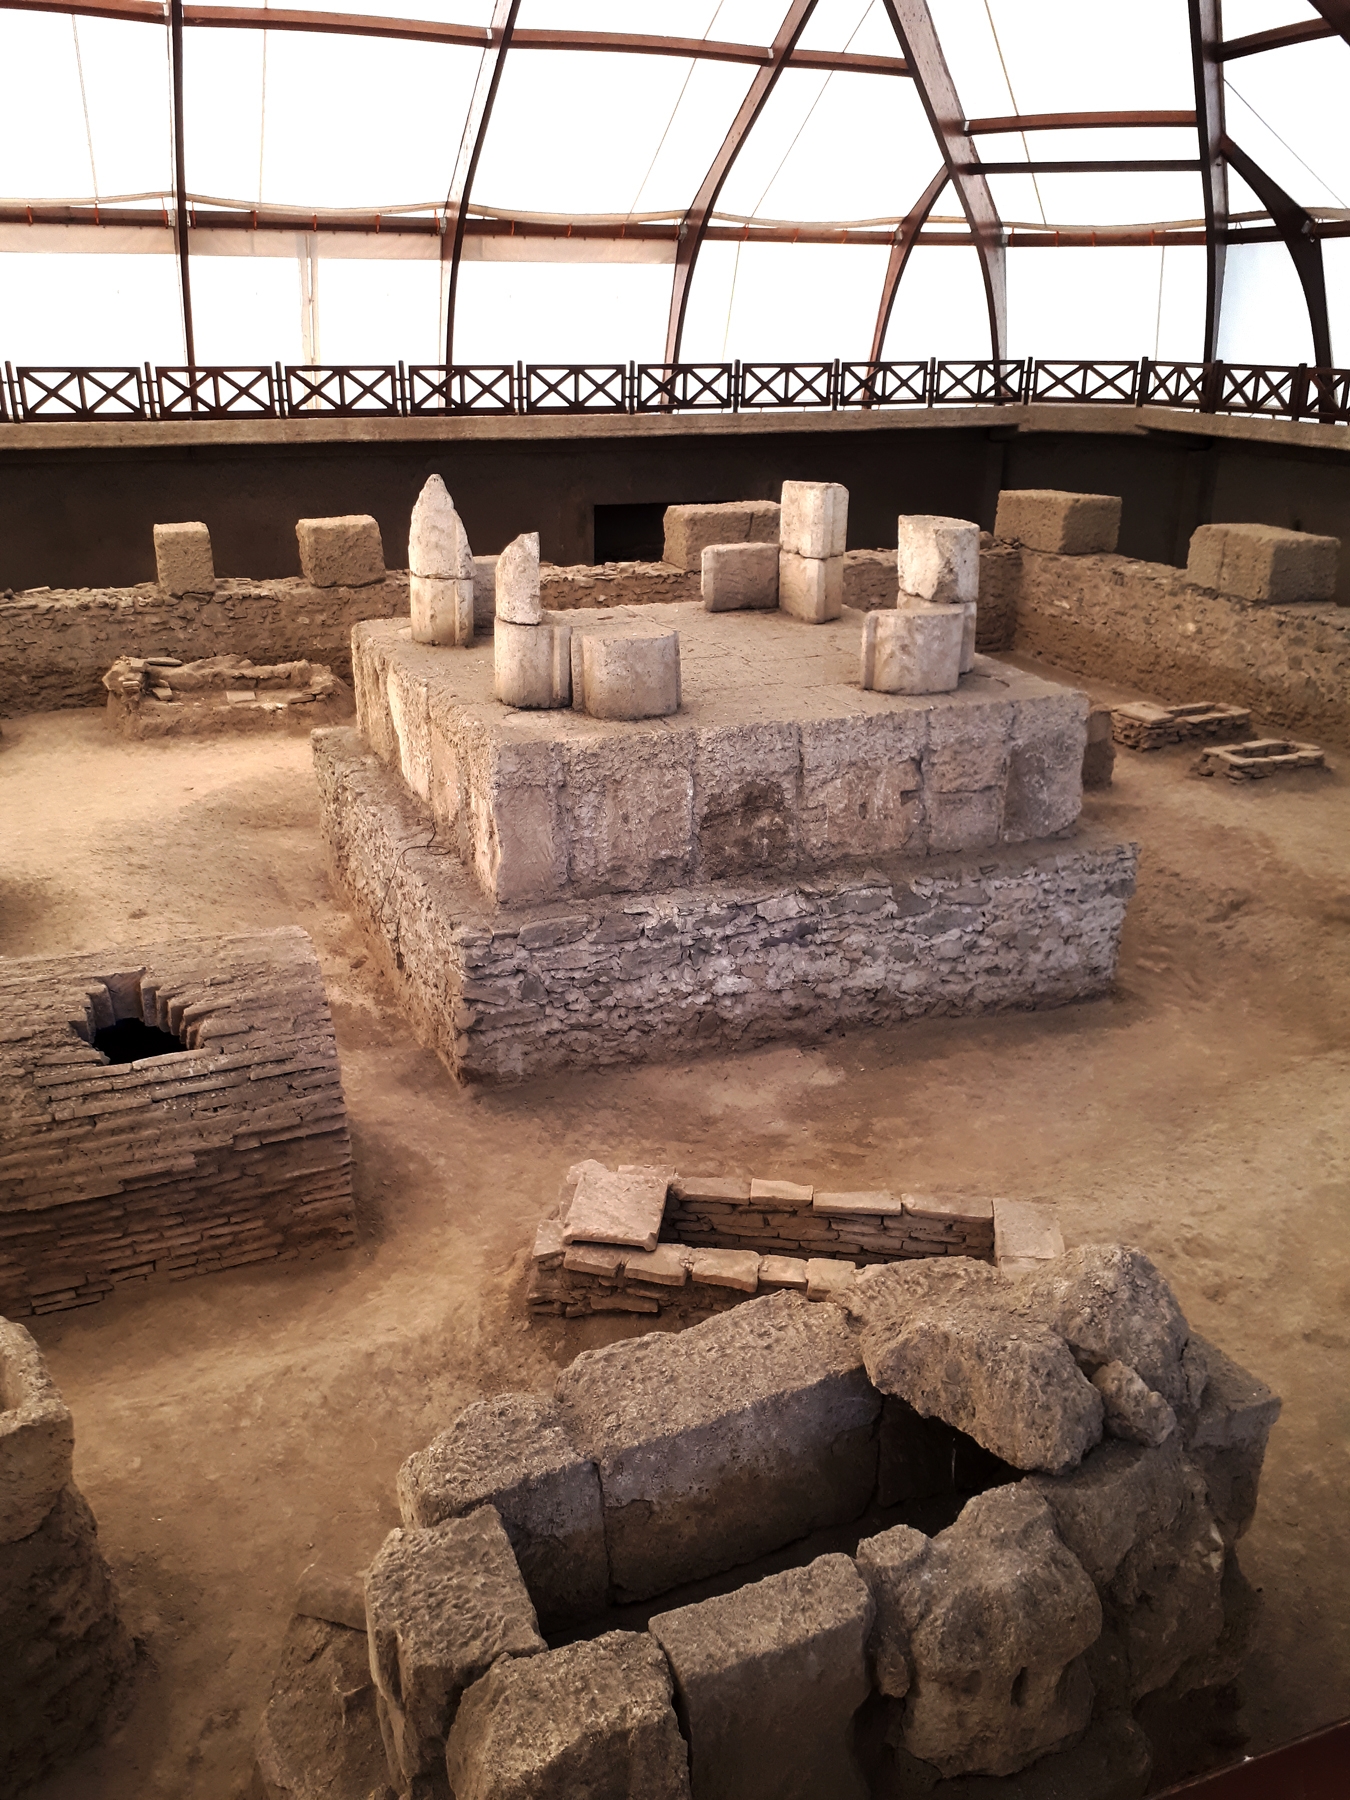 Mausoleum of Viminacium, which undoubtedly belonged to a very important individual. Archaeologists believe it could belong to Emperor Hostilian. Credit: Carles Lalueza-Fox.